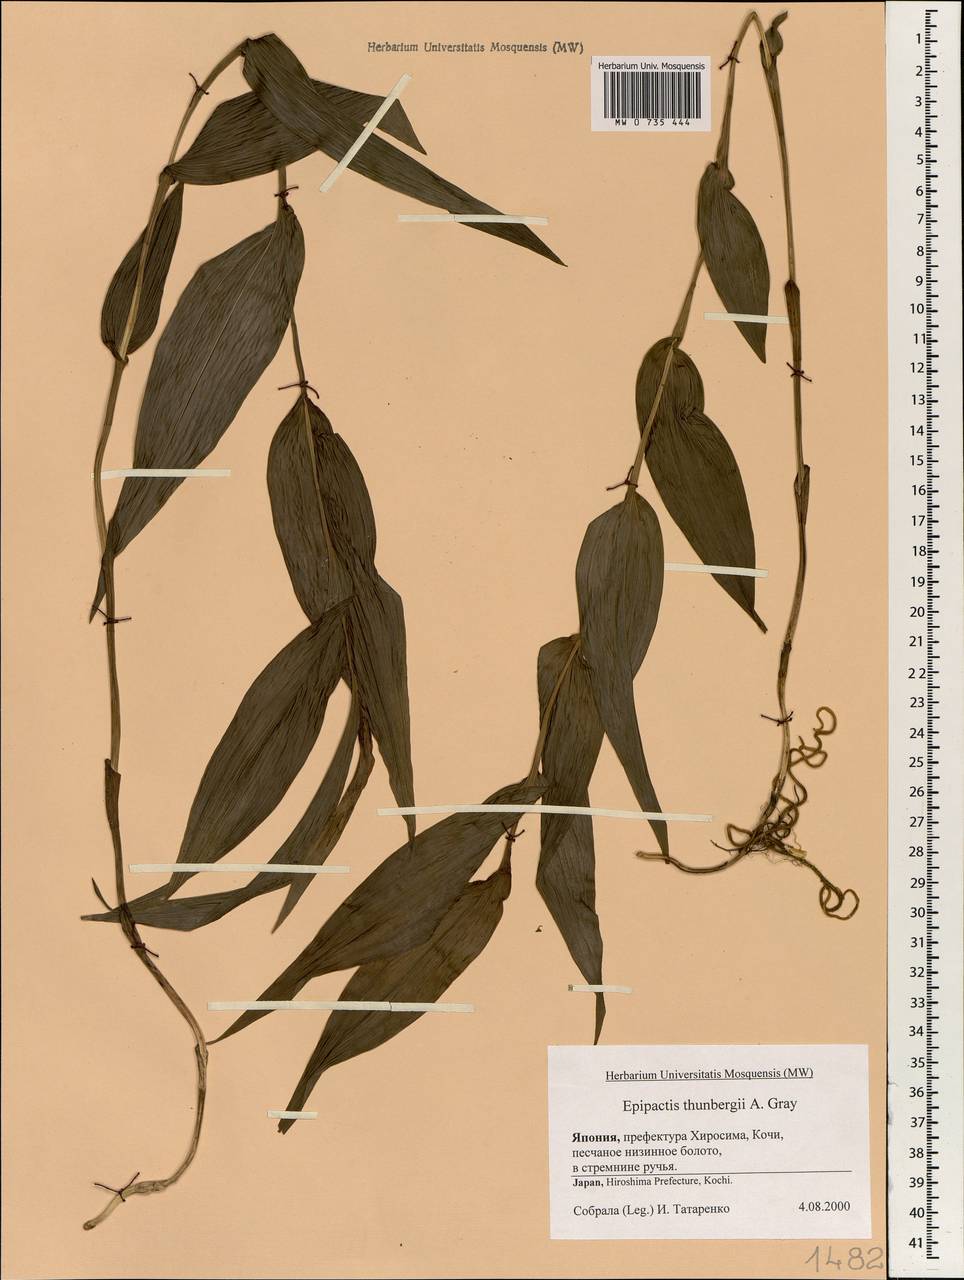 Epipactis thunbergii A.Gray, South Asia, South Asia (Asia outside ex-Soviet states and Mongolia) (ASIA) (Japan)